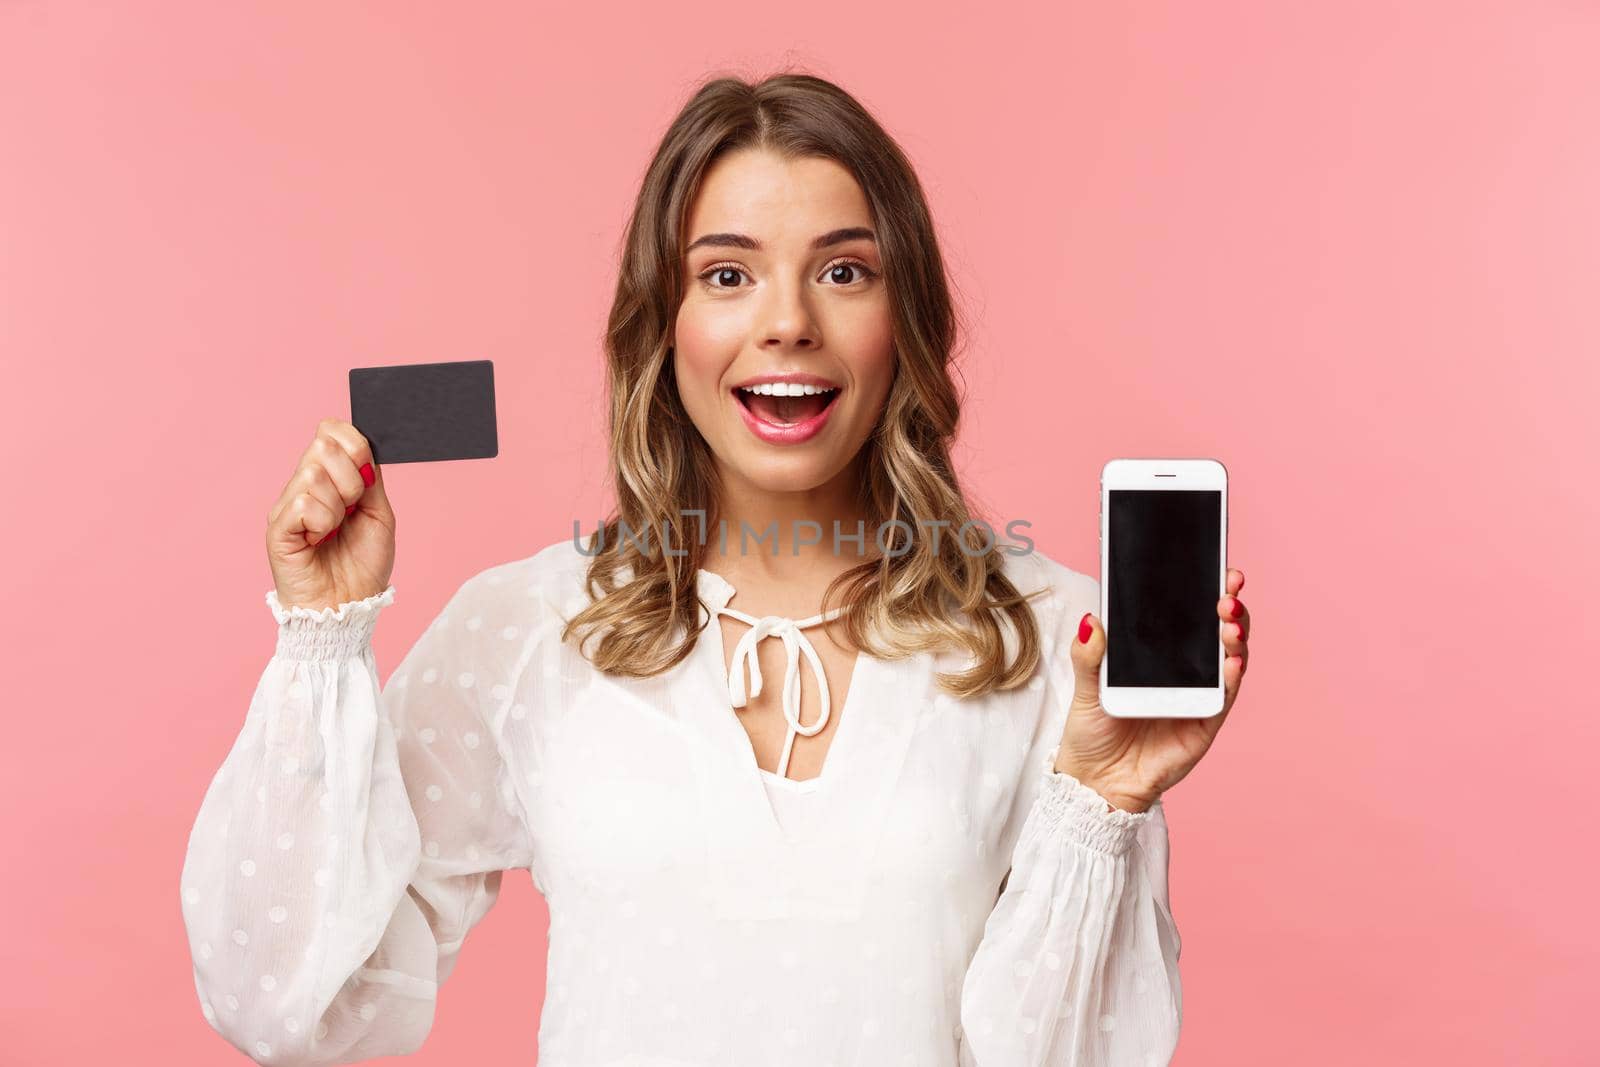 Finance, shopping and technology concept. Close-up portrait of excited blond attractive girl in white dress, showing credit card and mobile phone, advertise online store, smartphone app.